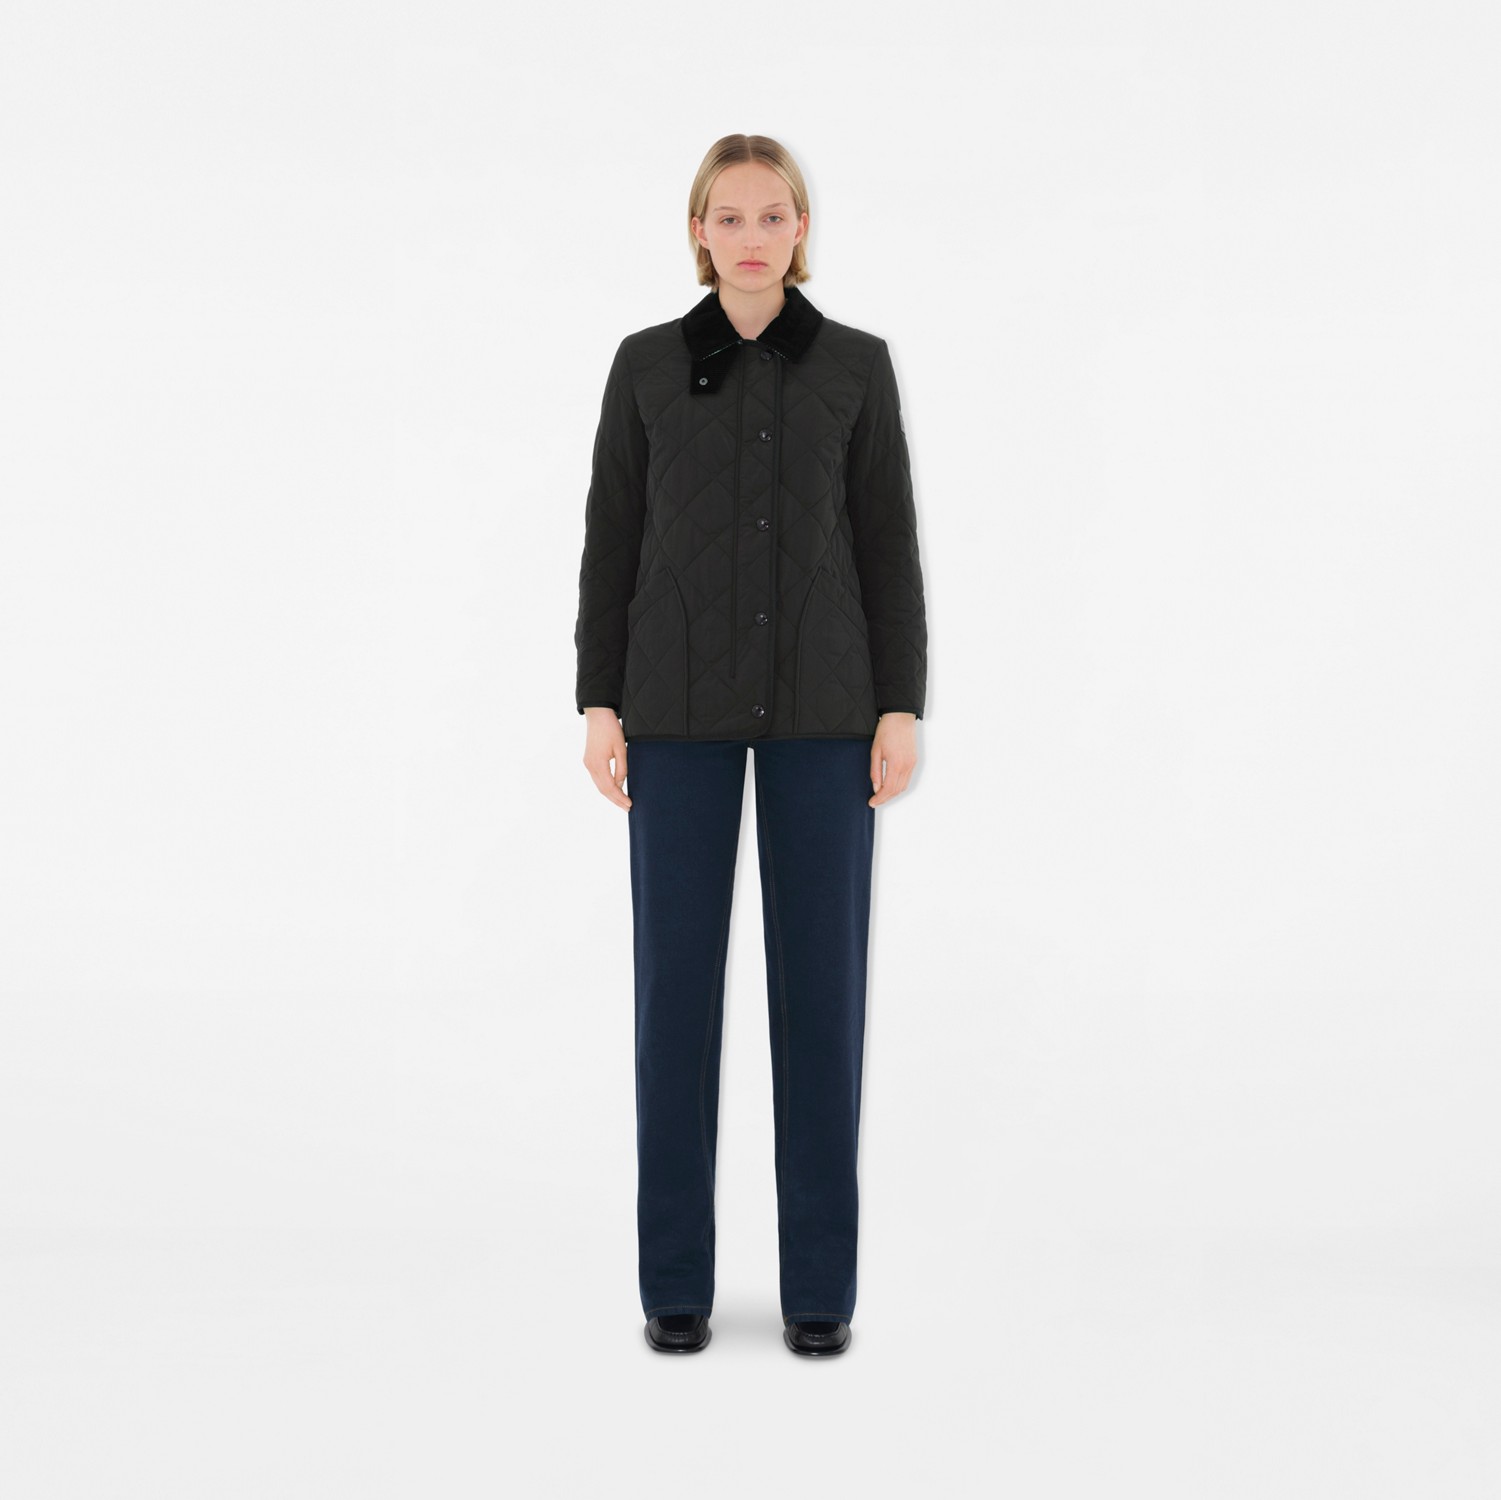 Quilted Thermoregulated Barn Jacket